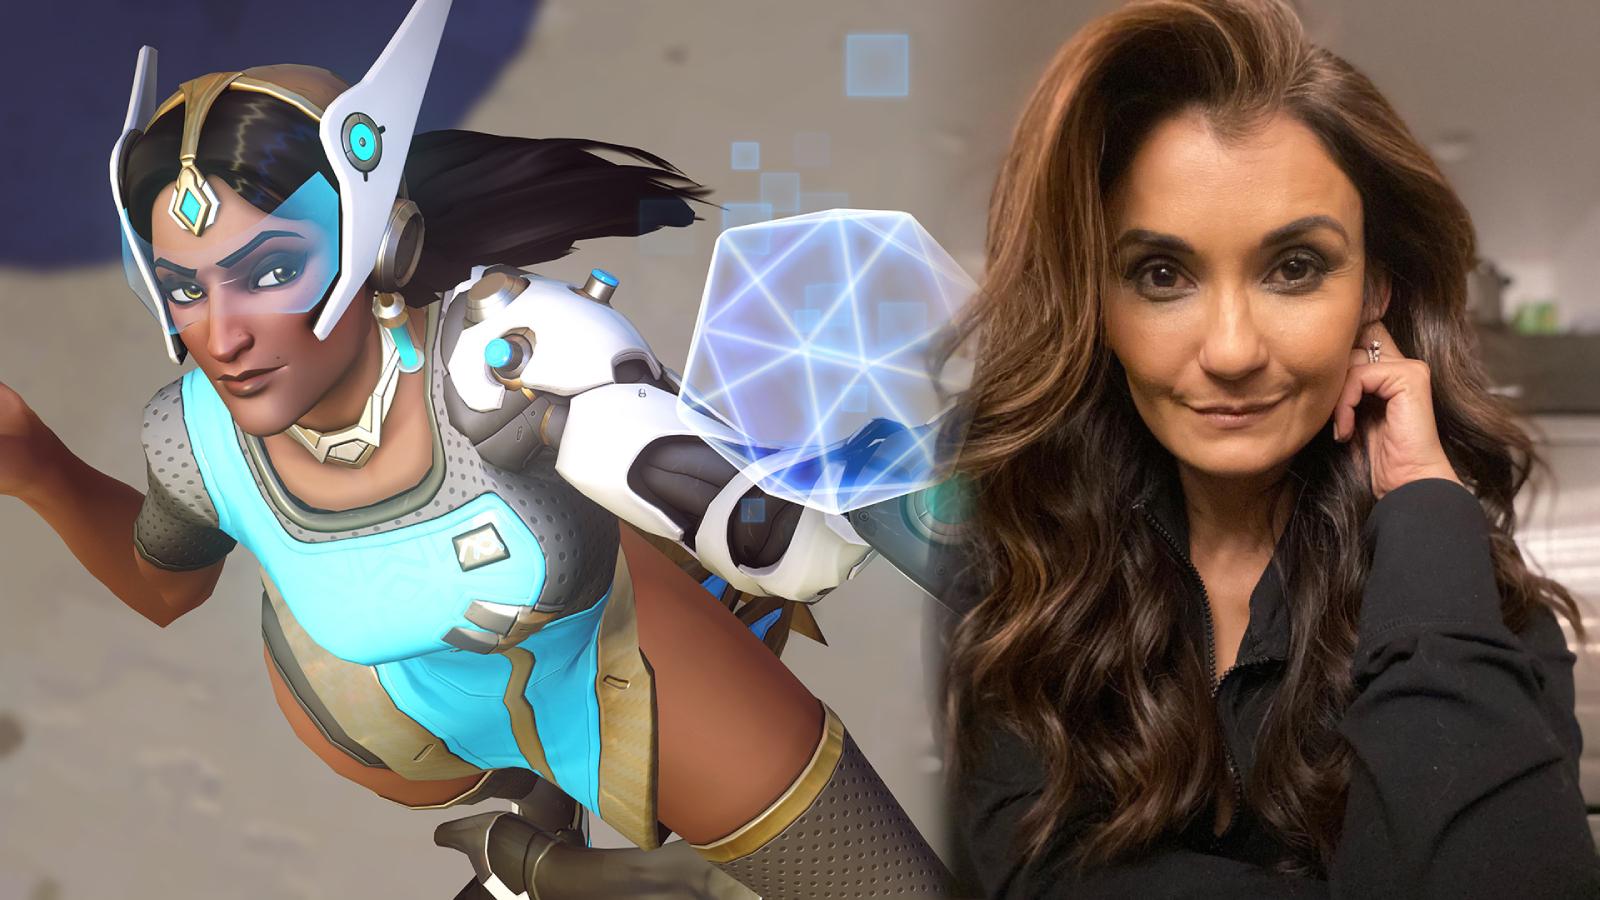 Symmetra in Overwatch 2 with Voice Actor Anjali Bhimani